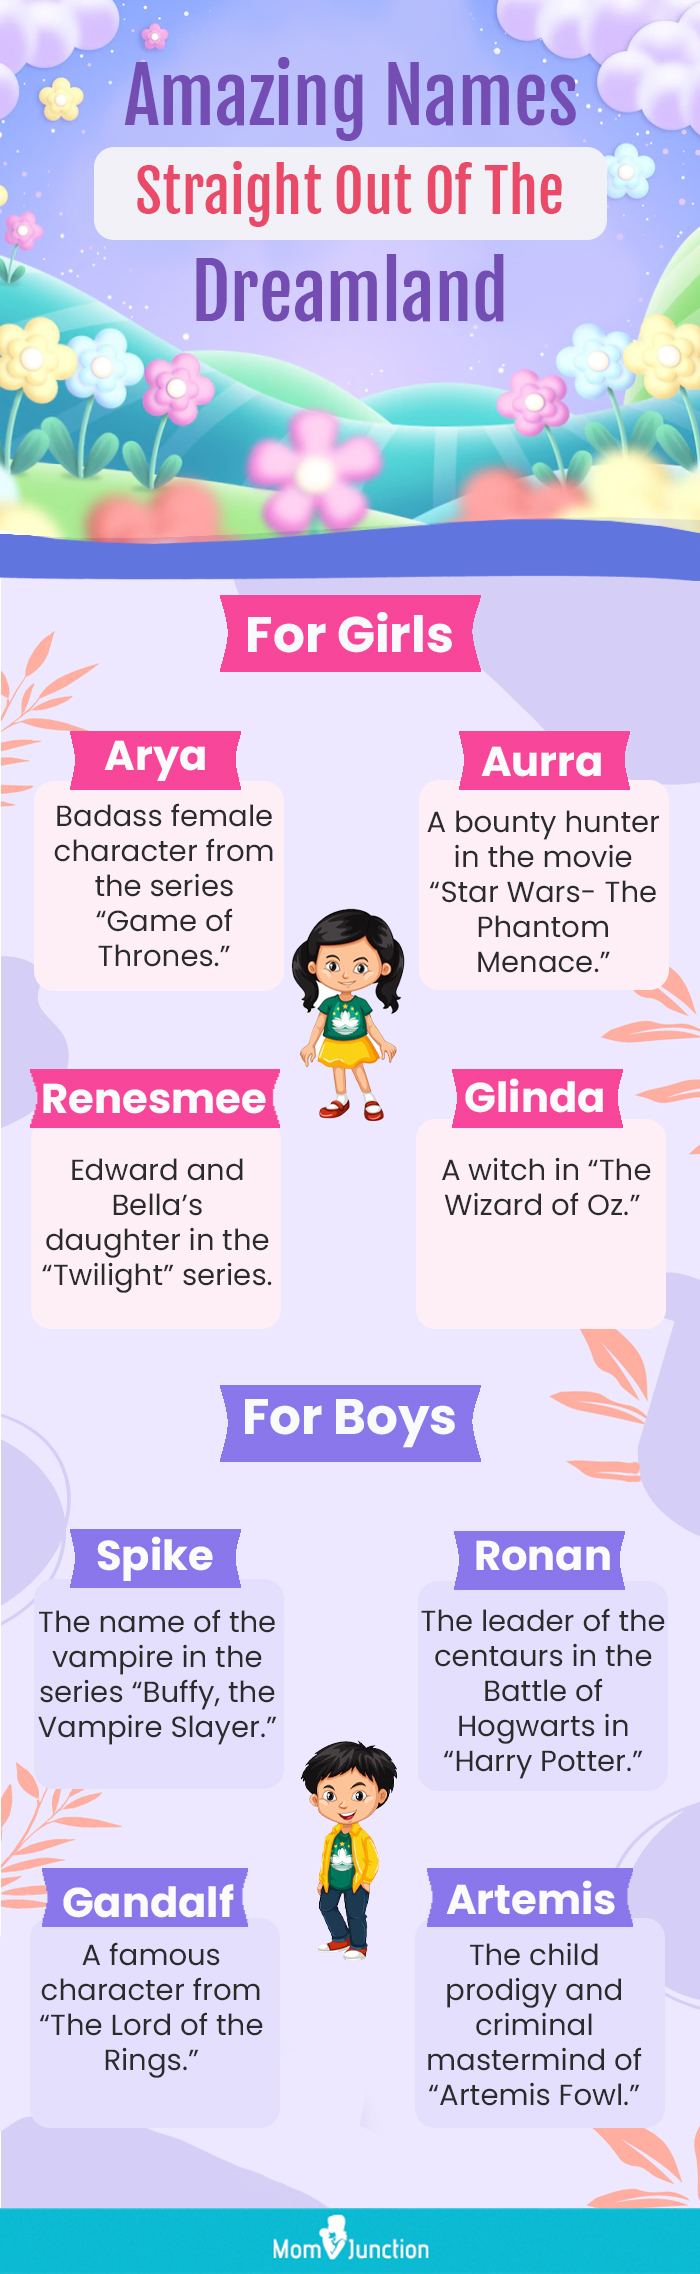 amazing names straight out of the dreamland [infographic]